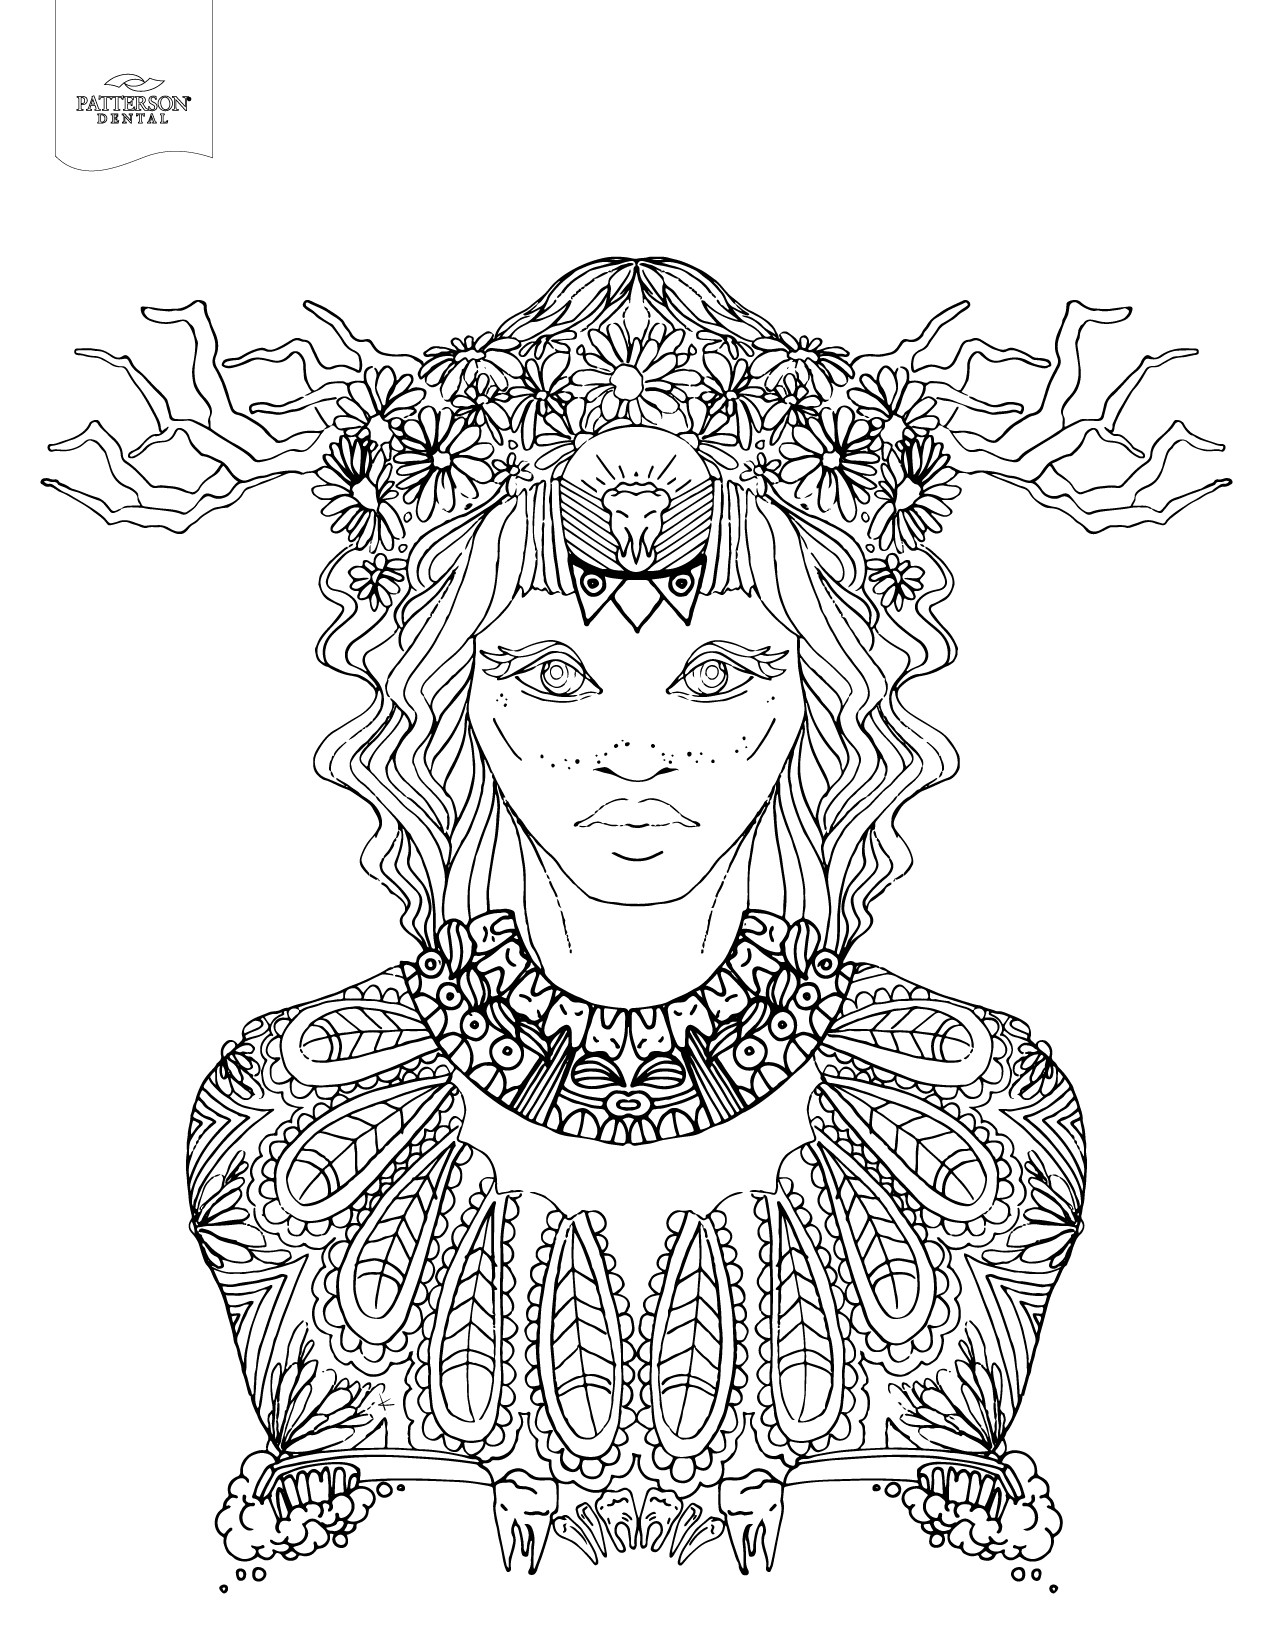 Coloring Pages Adult
 10 Toothy Adult Coloring Pages [Printable] f The Cusp